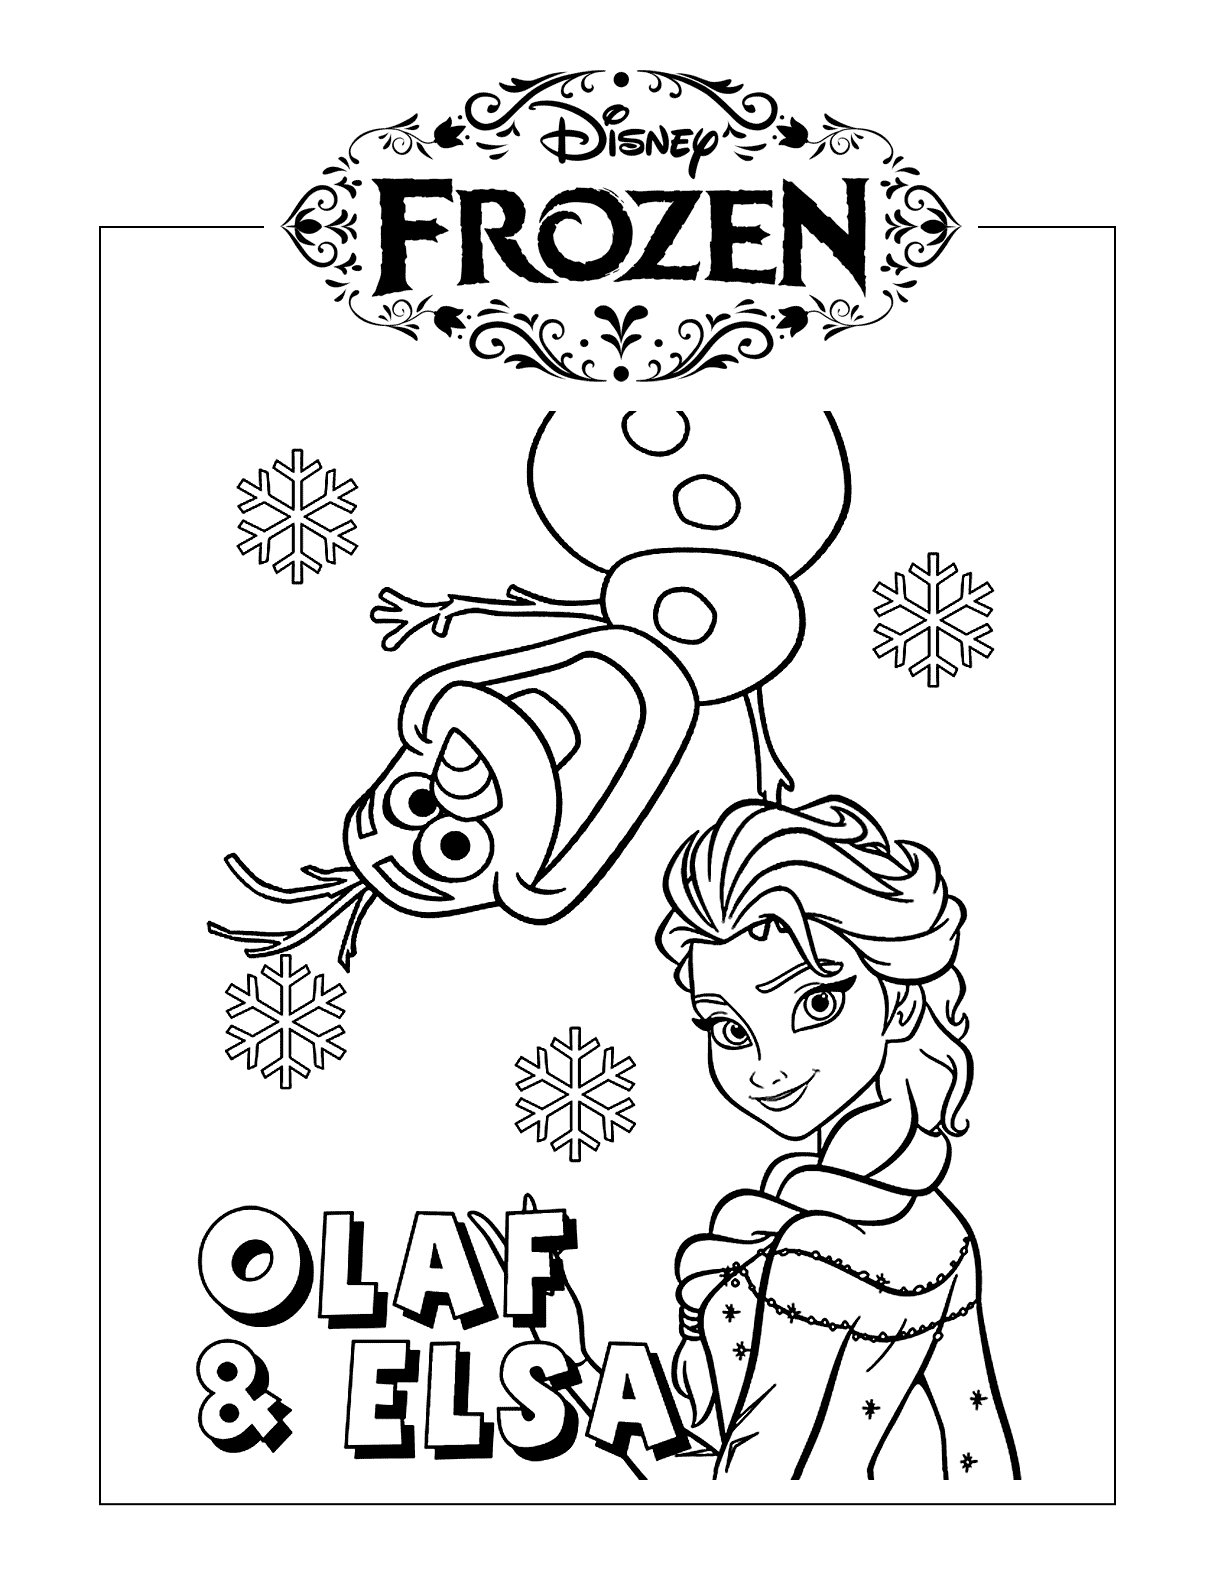 Olaf And Elsa Coloring Page